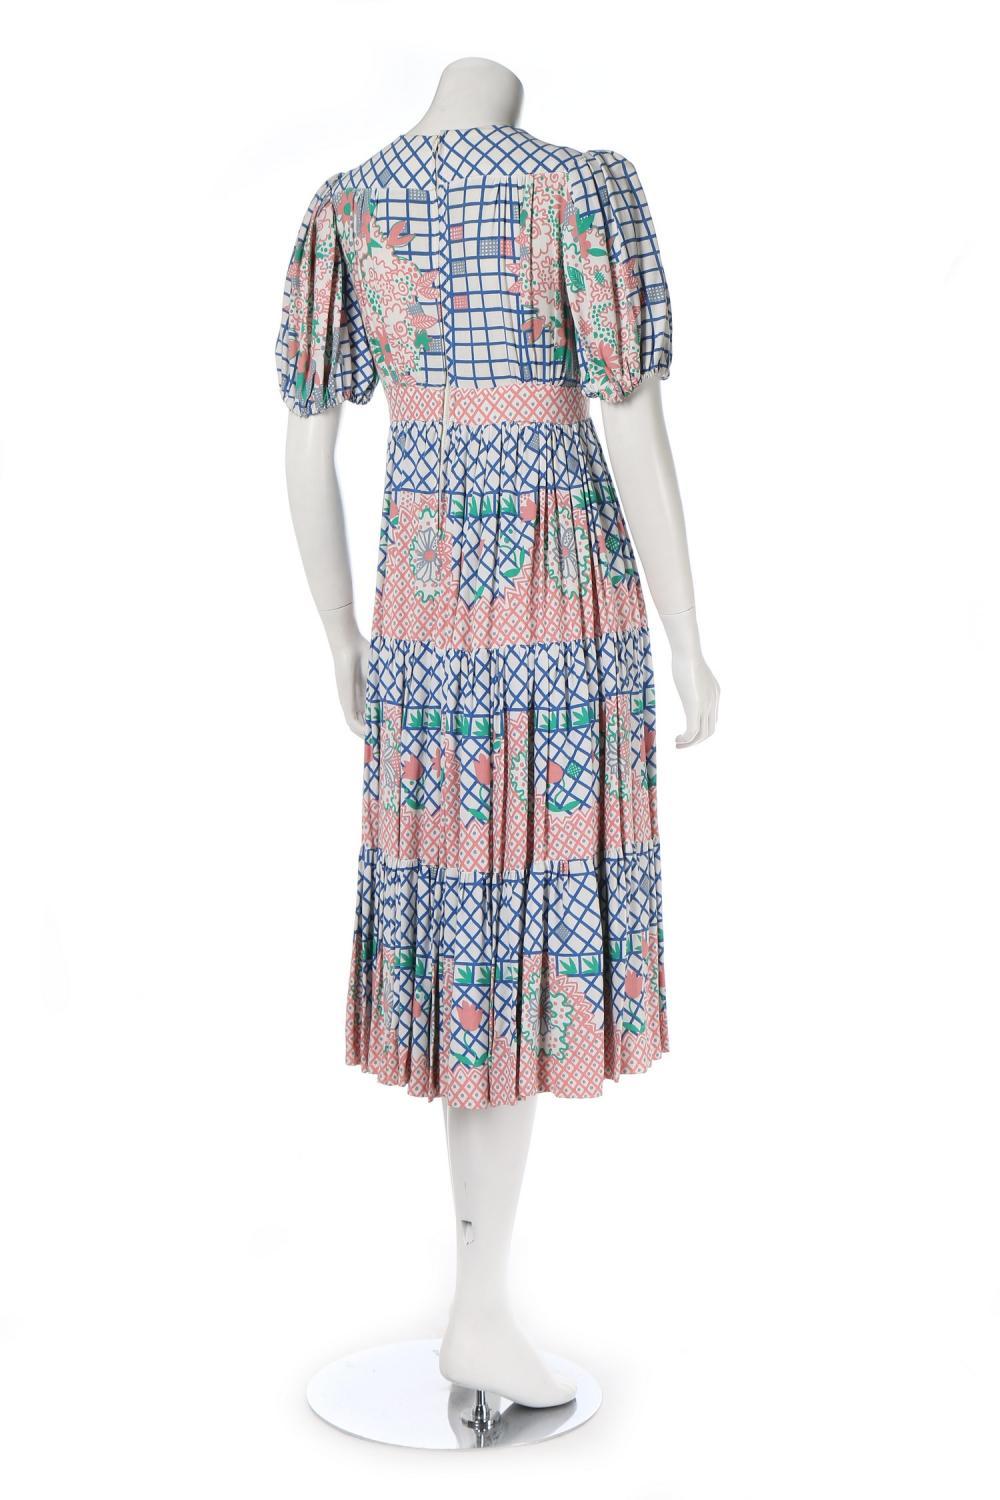 Ca. 1972 Ossie Clark/Celia Birtwell for Radley cotton short-sleeved dress with plunging v neckline, tiered skirt and abstract print featuring a blue windowpane check background sprouting pink flowers. In excellent condition. UK size 10  - please